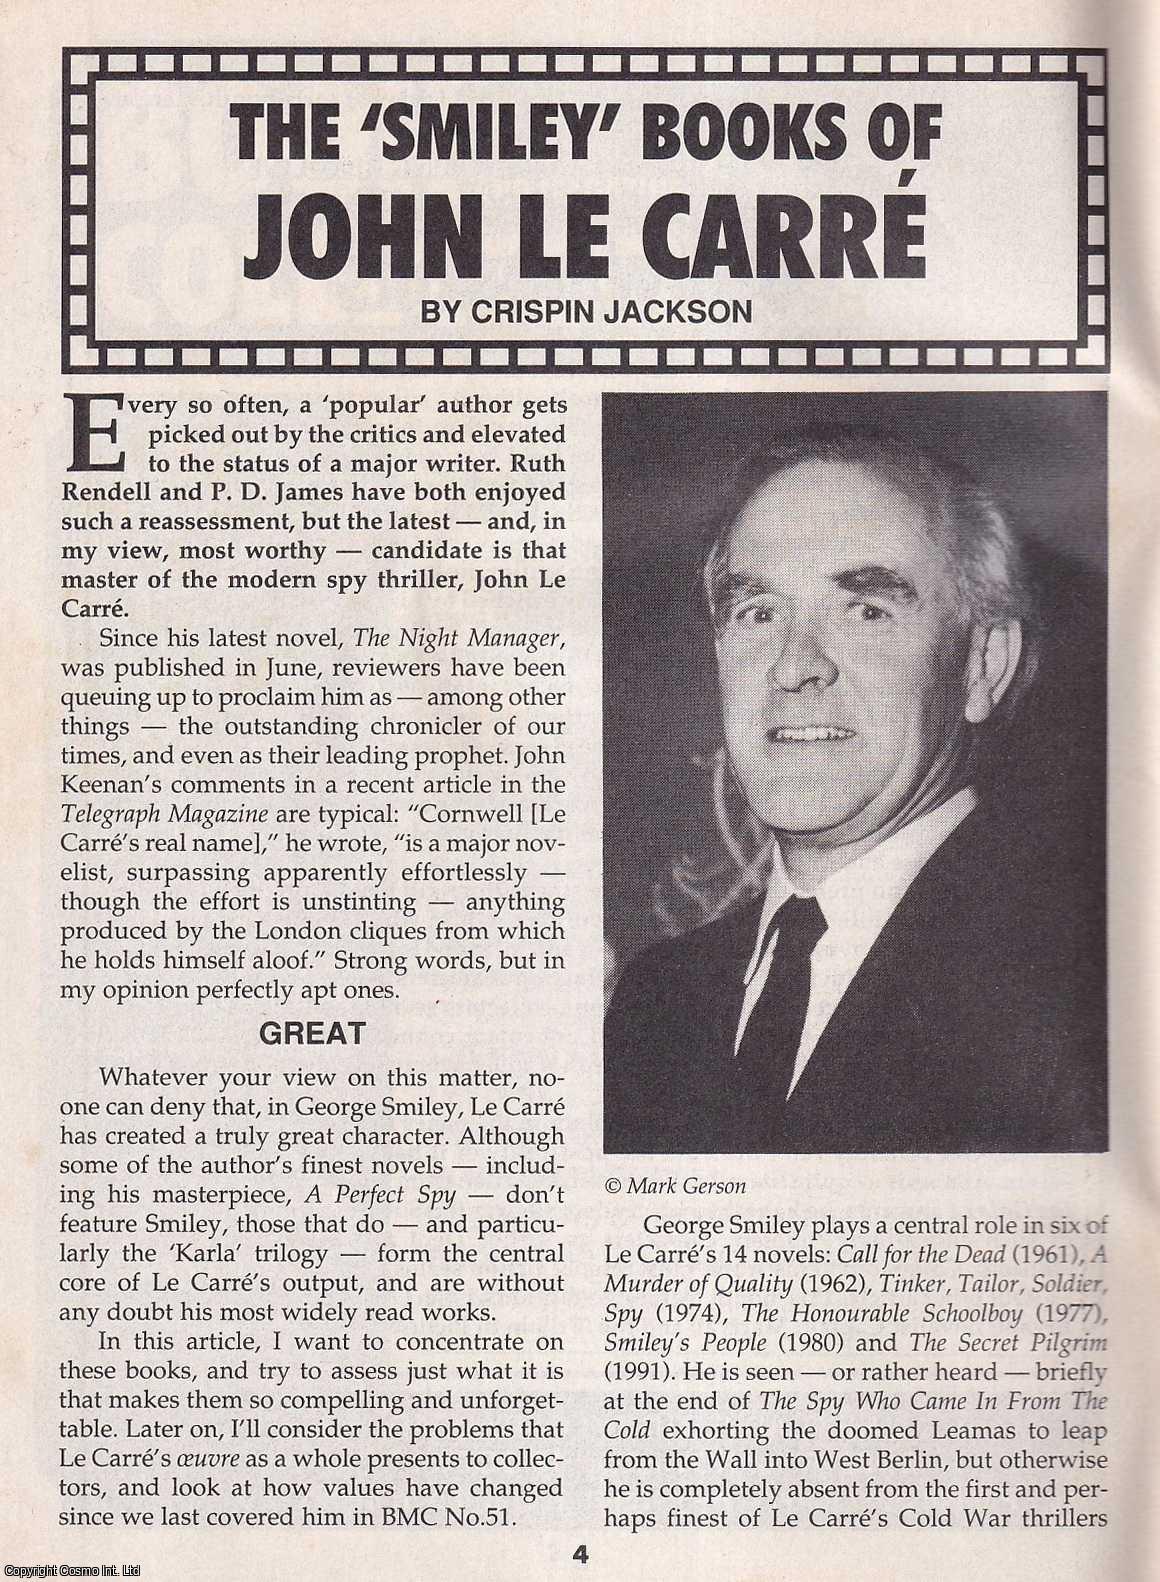 Crispin Jackson - The Smiley Books of John Le Carre. This is an original article separated from an issue of The Book & Magazine Collector publication.